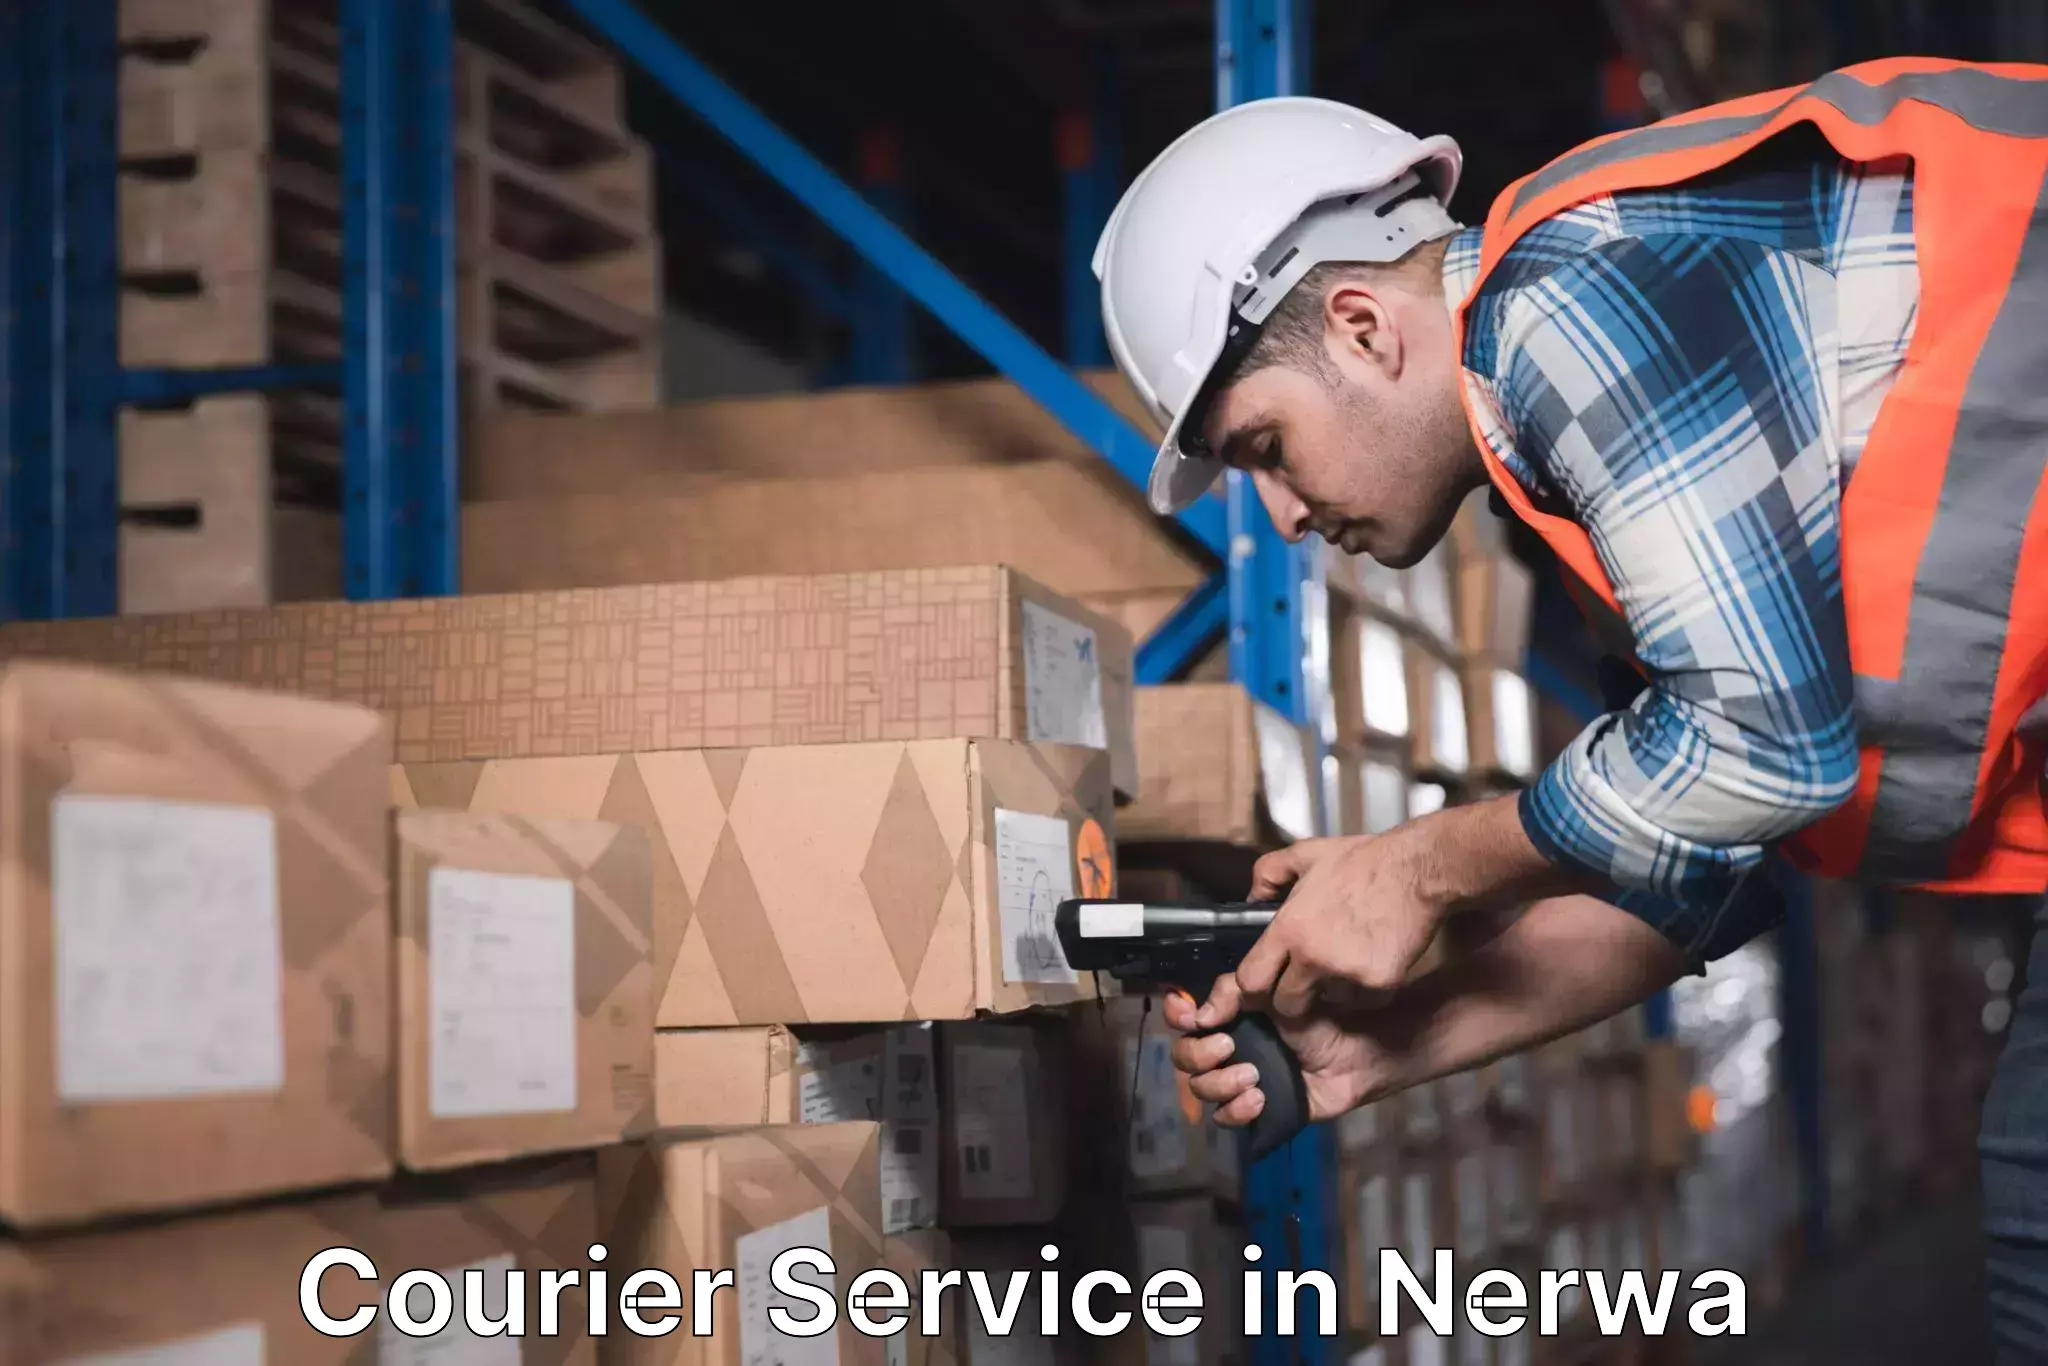 Express delivery capabilities in Nerwa